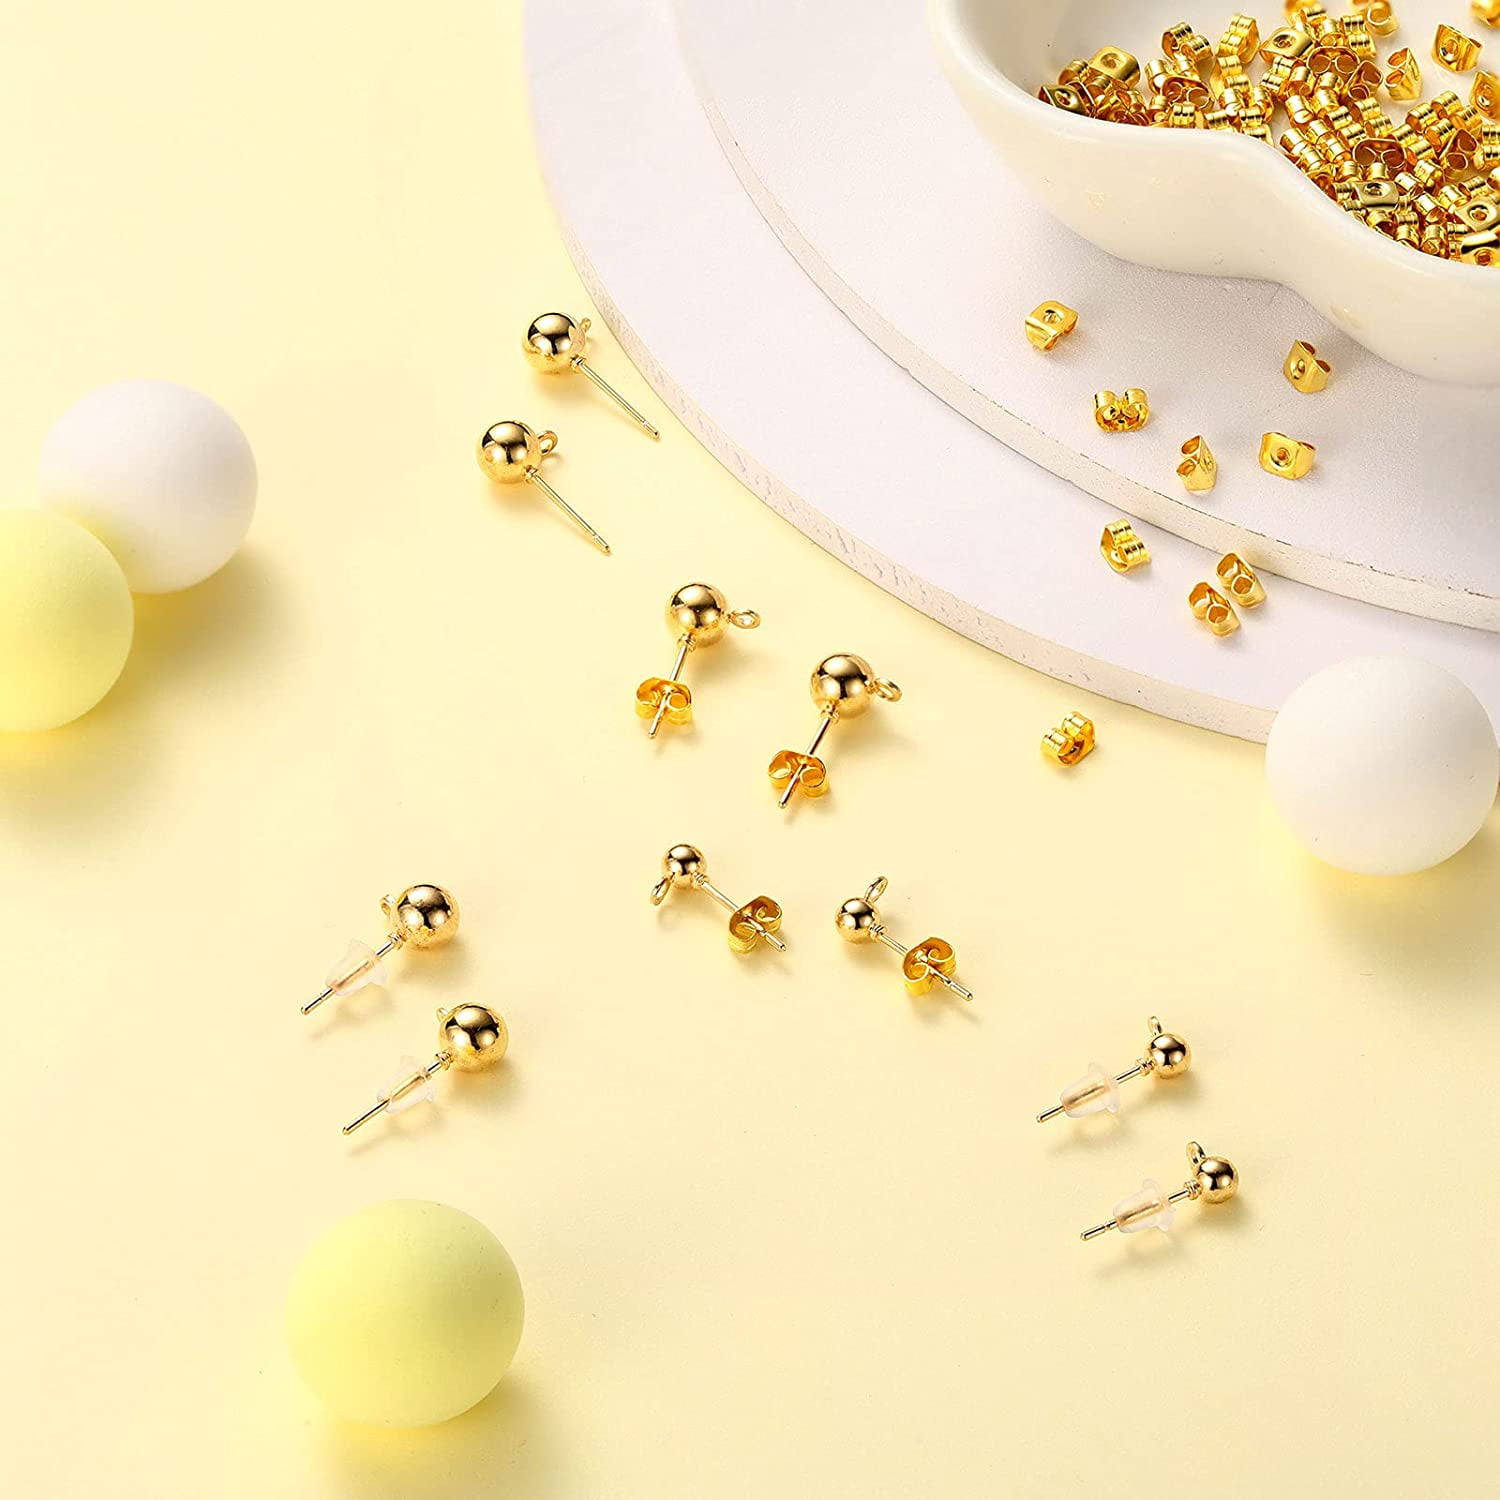 Oubaka 300Pcs Ball Post Earring Studs for Jewelry Making,3 Sizes